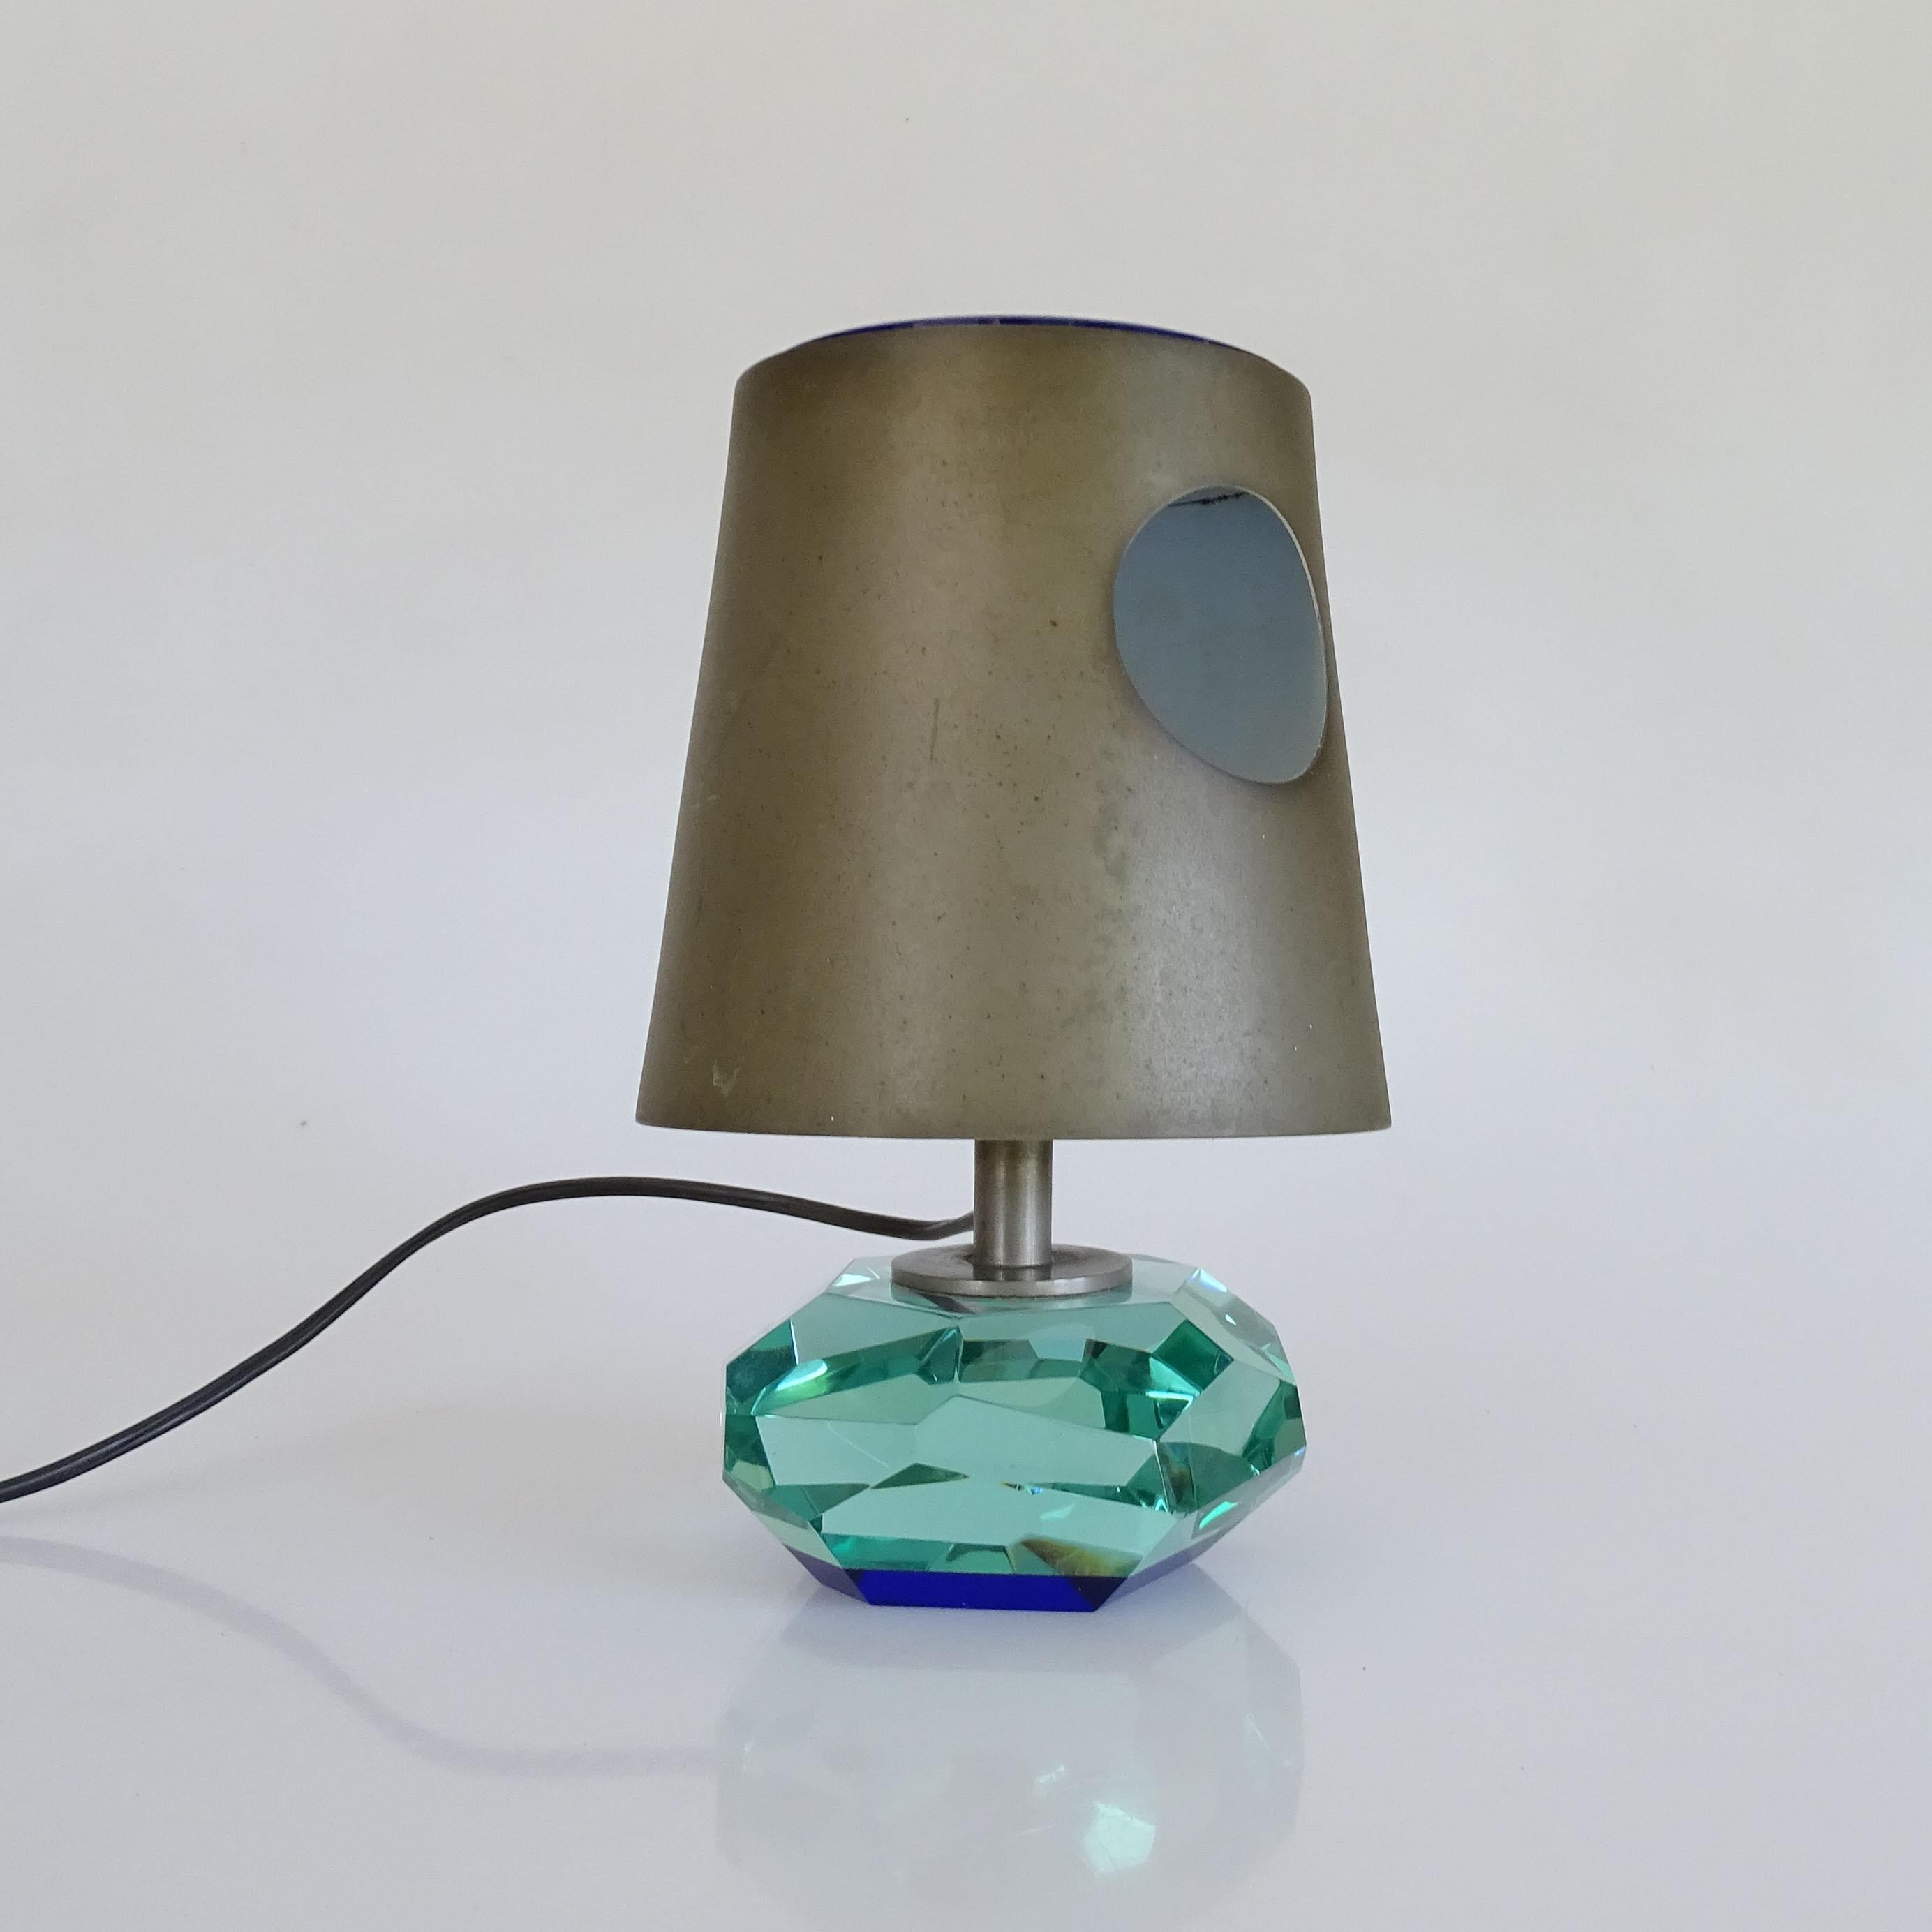 Iconic Max Ingrand pair of table lamps model. 2228 for Fontana Arte, Italy 1960s
All original.